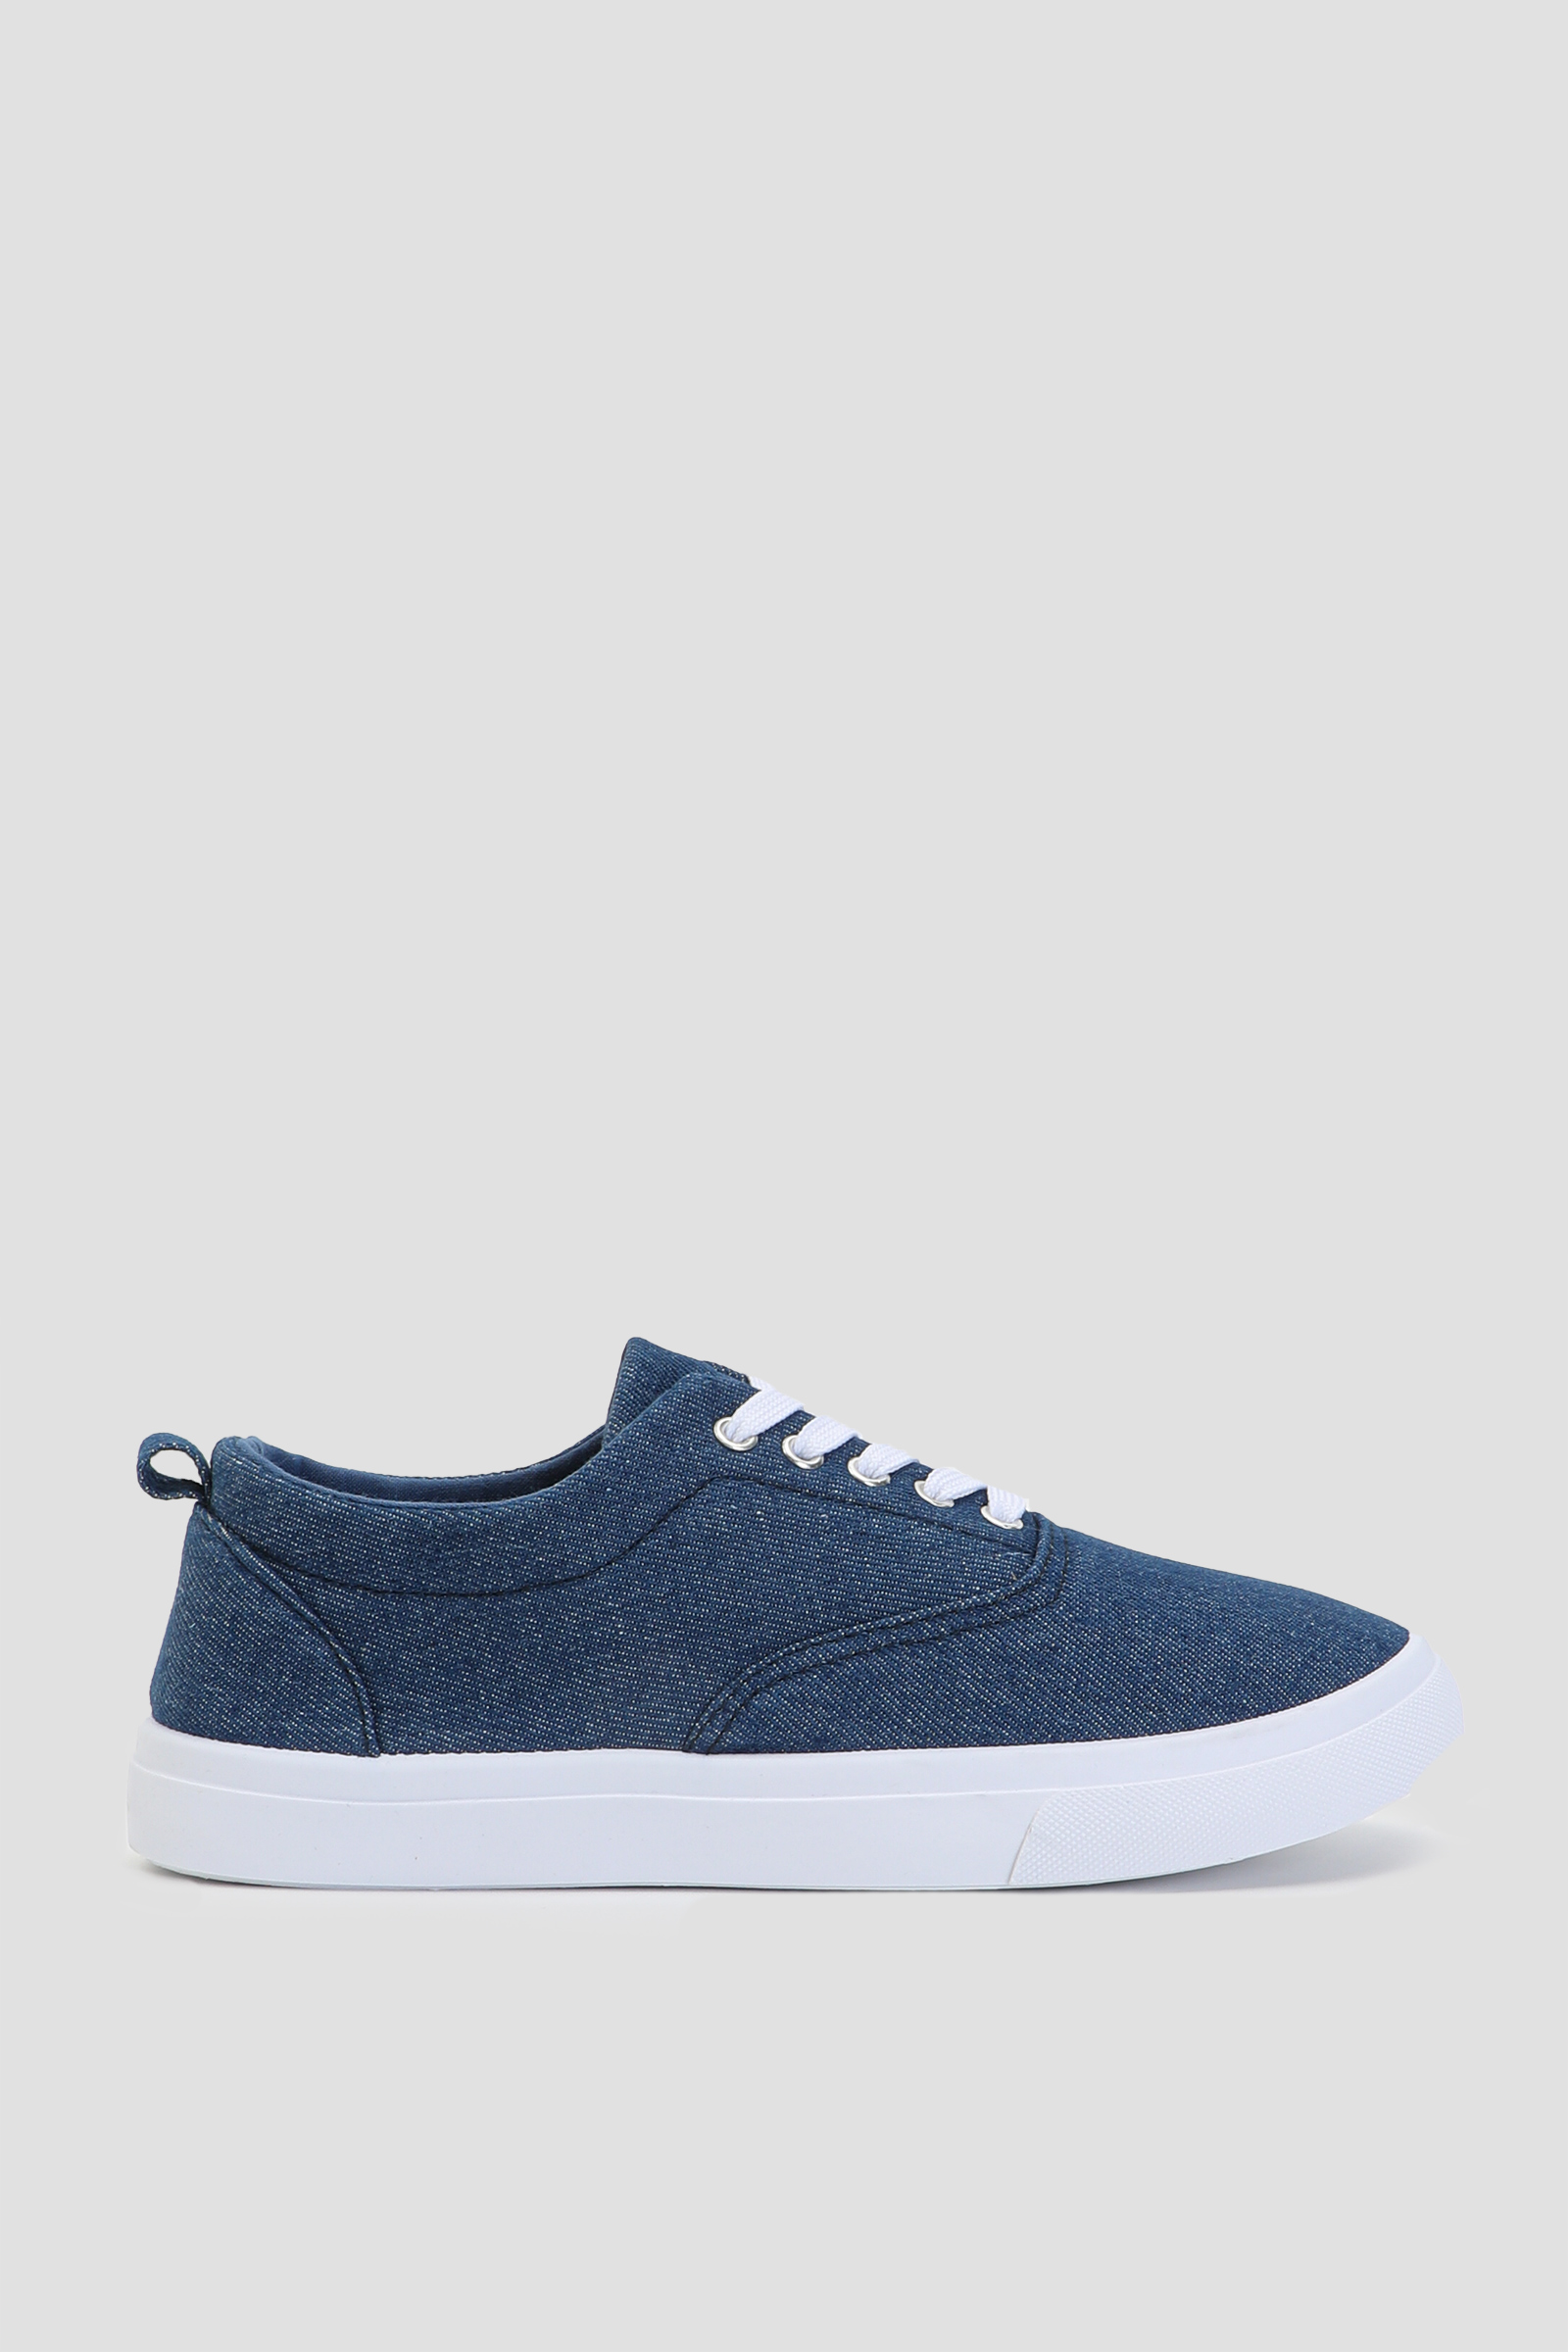 Ardene Canvas Low Top Sneakers in Dark Blue | Size | Rubber | Eco-Conscious | 100% Recycled